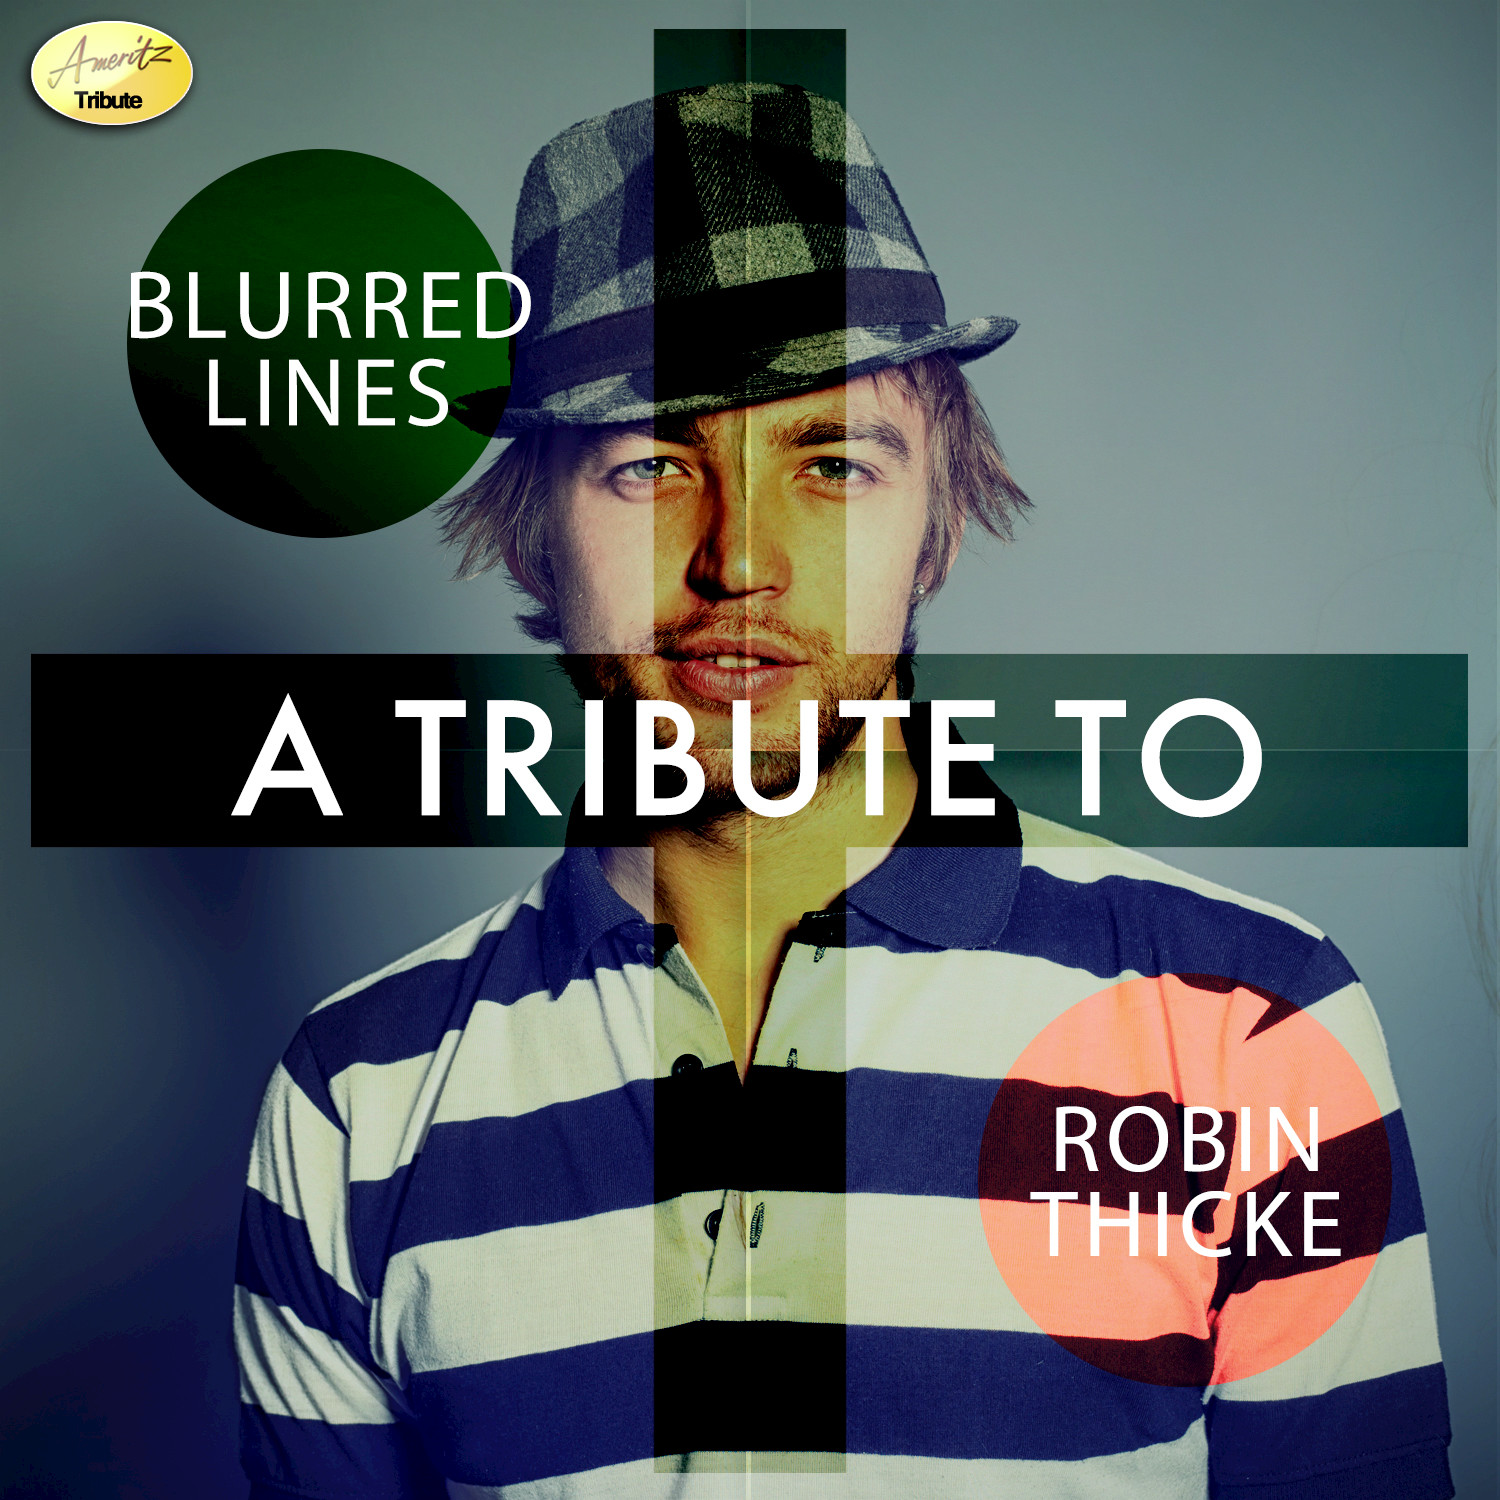 Blurred Lines - A Tribute to Robin Thicke